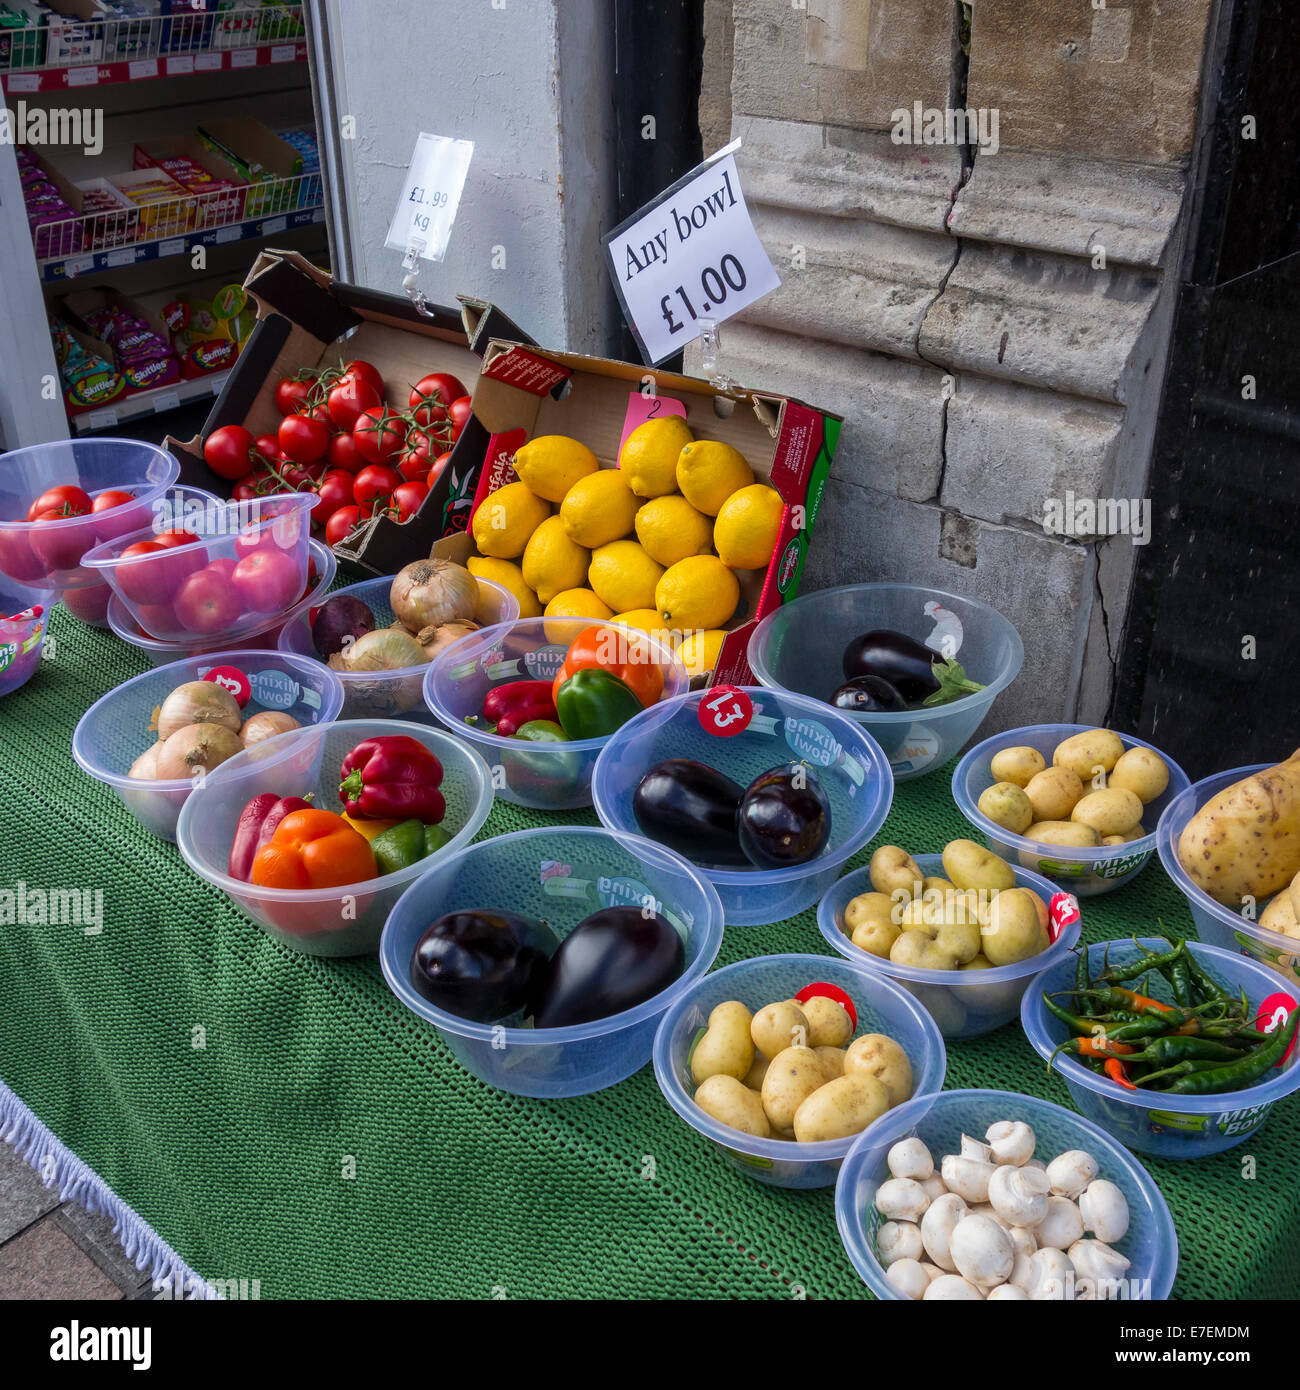 Fresh Fruit and Vegetables Stall Greengrocers Mediterranean Food Stock Photo